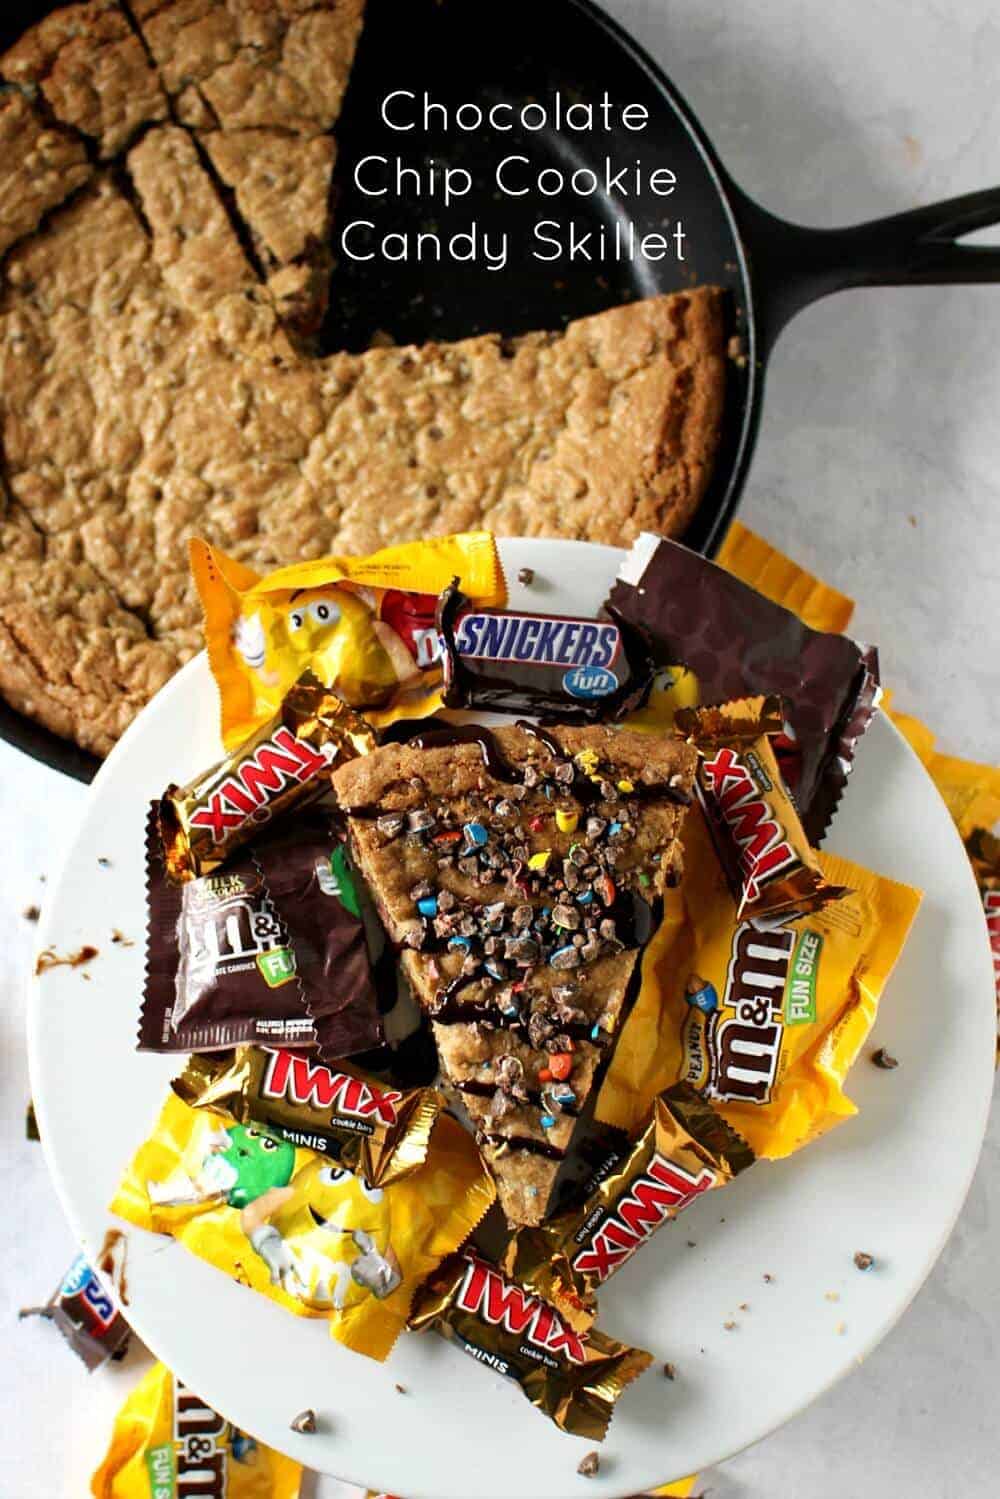 Chocolate Chip Cookie Candy Skillet